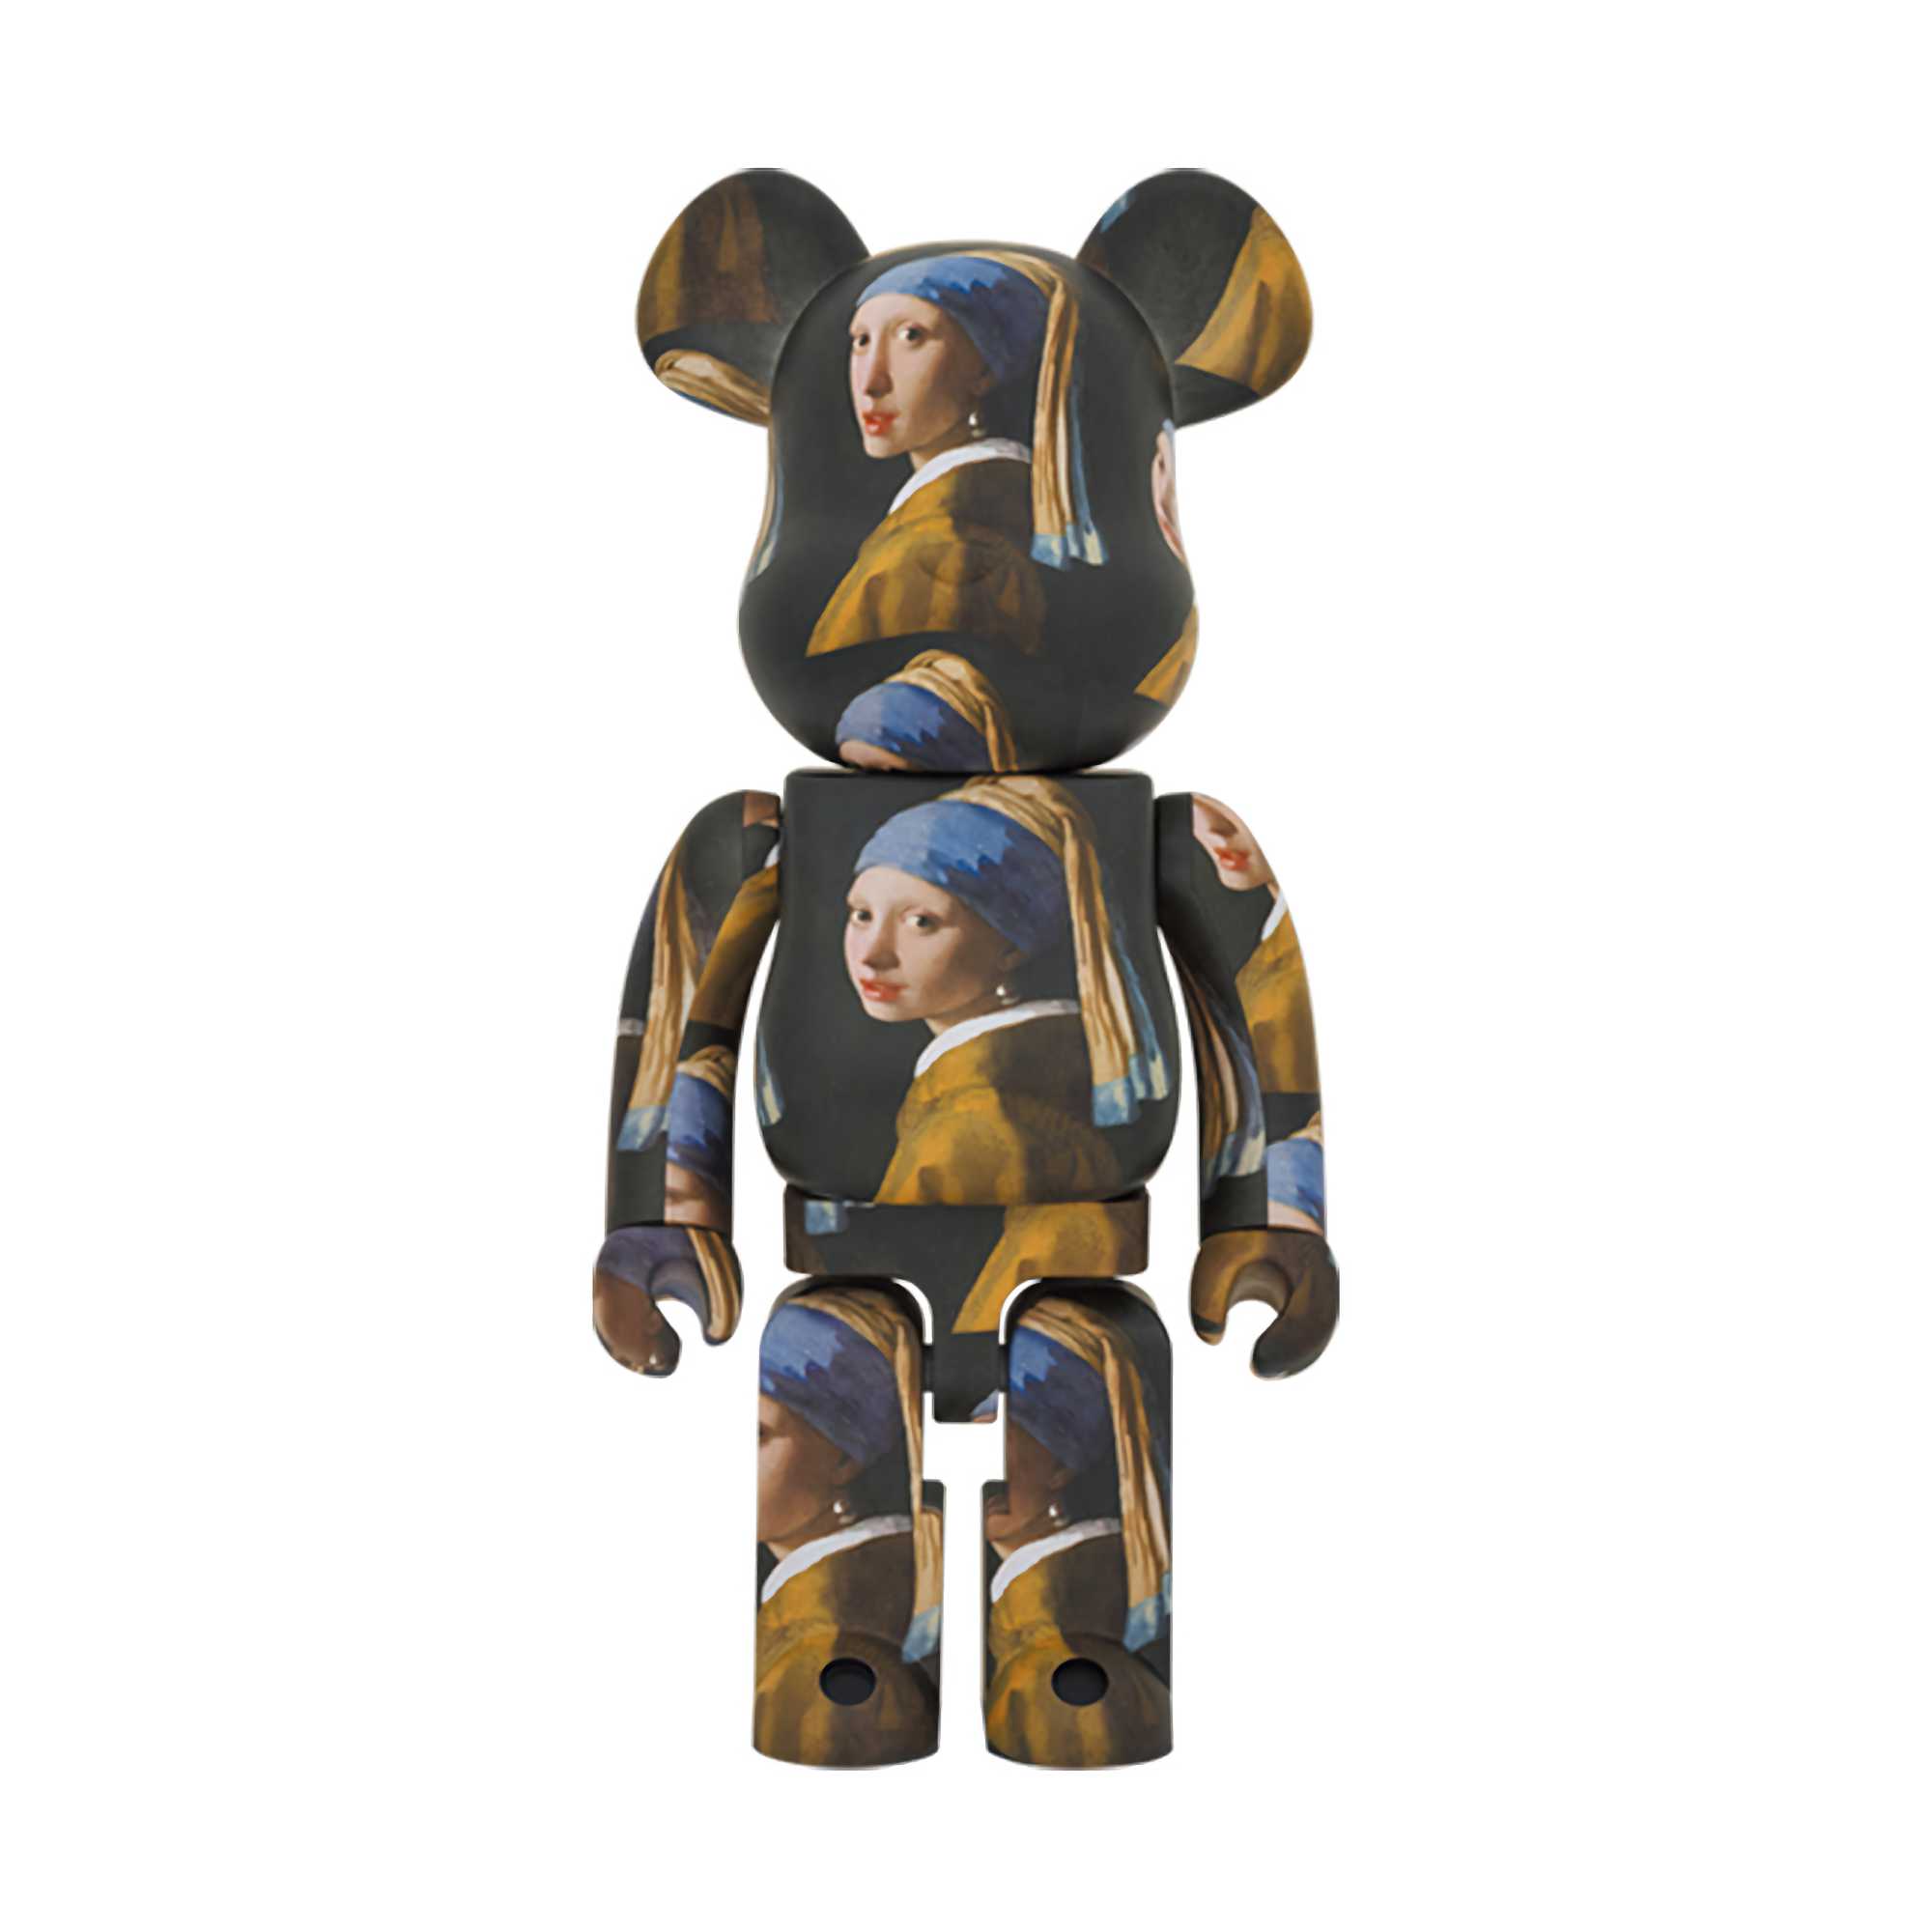 BE@RBRICK Johannese Vermeer 「THE GIRL WITH THE PEARL EARRING」1000%